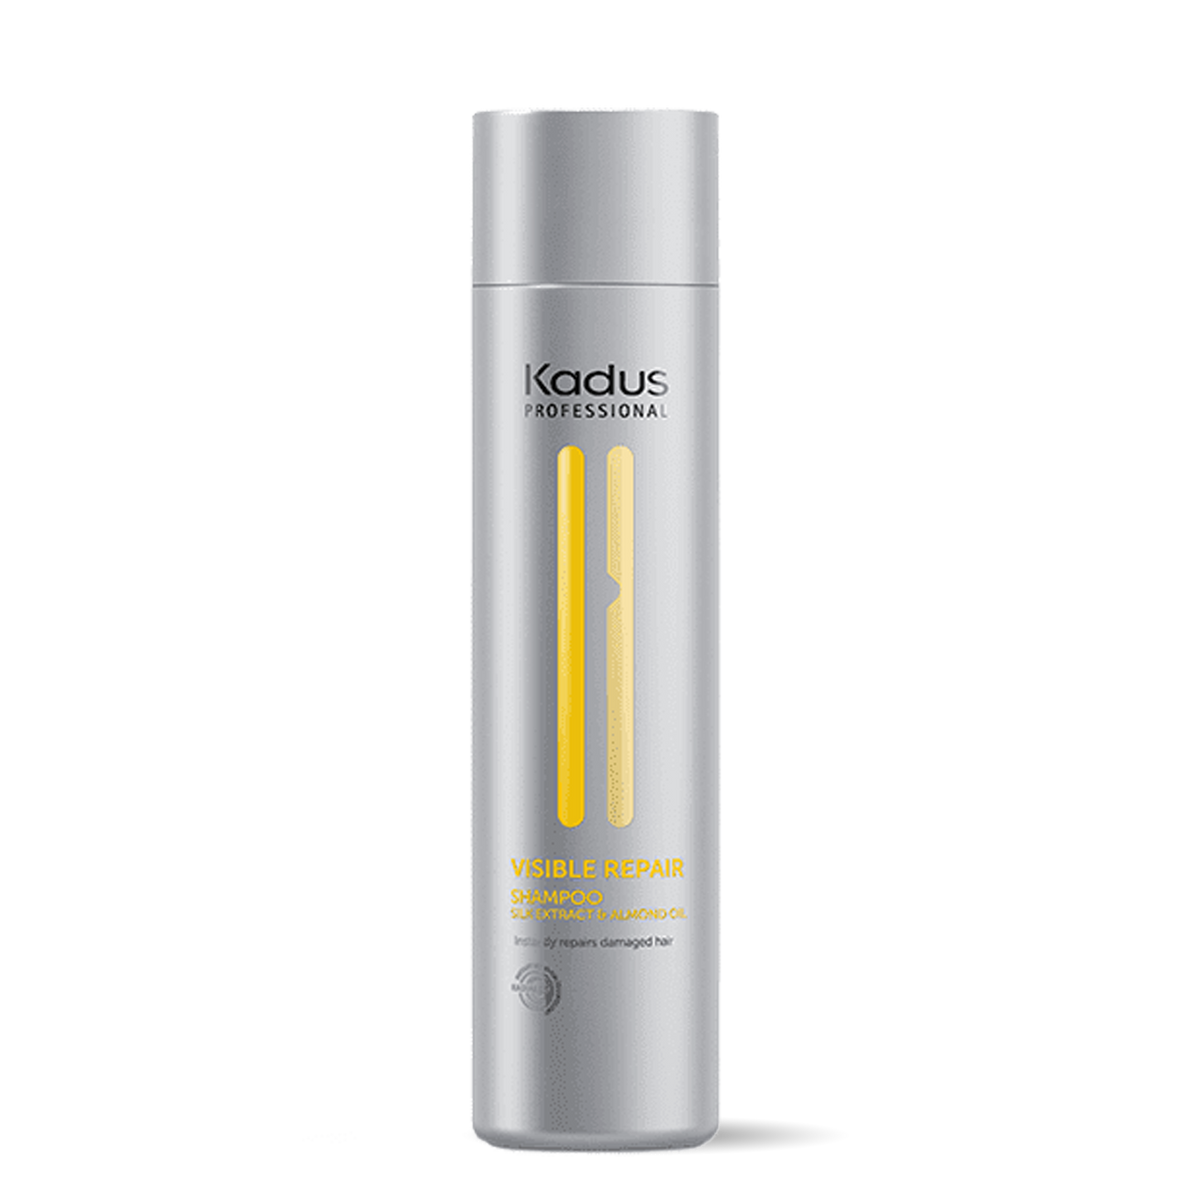 Kadus Visible Repair Shampoo - by Kadus Professionals |ProCare Outlet|